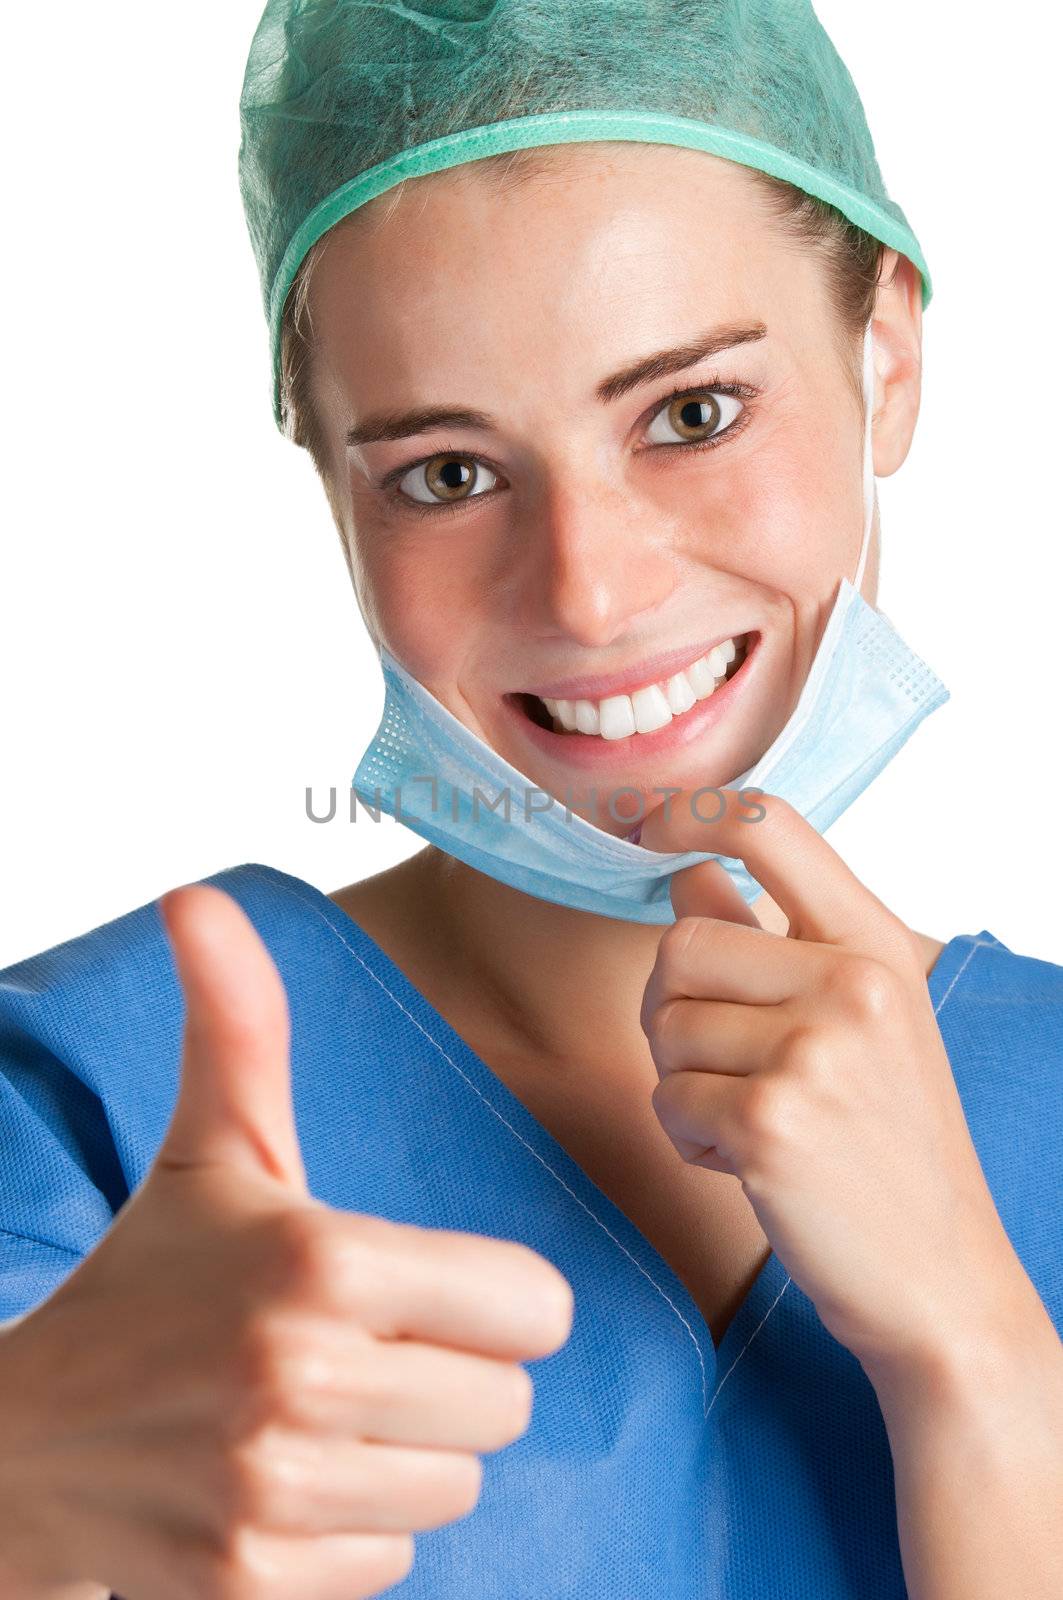 Female Surgeon smiling and giving a thumbs up